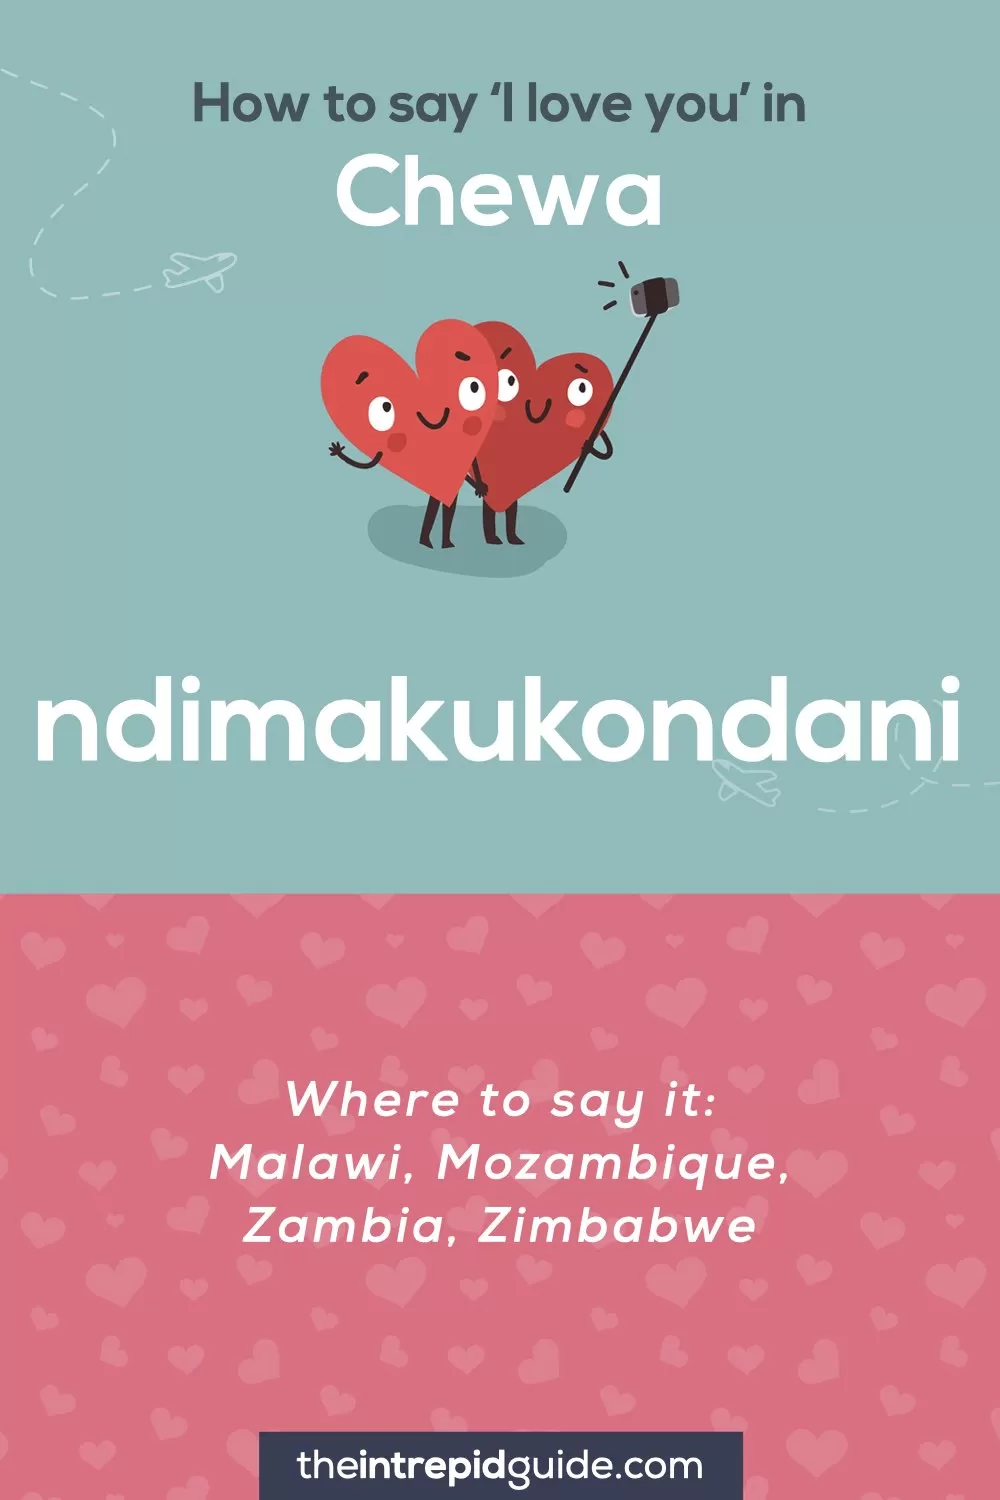 How to say I love you in different languages - Chewa - ndimakukondani